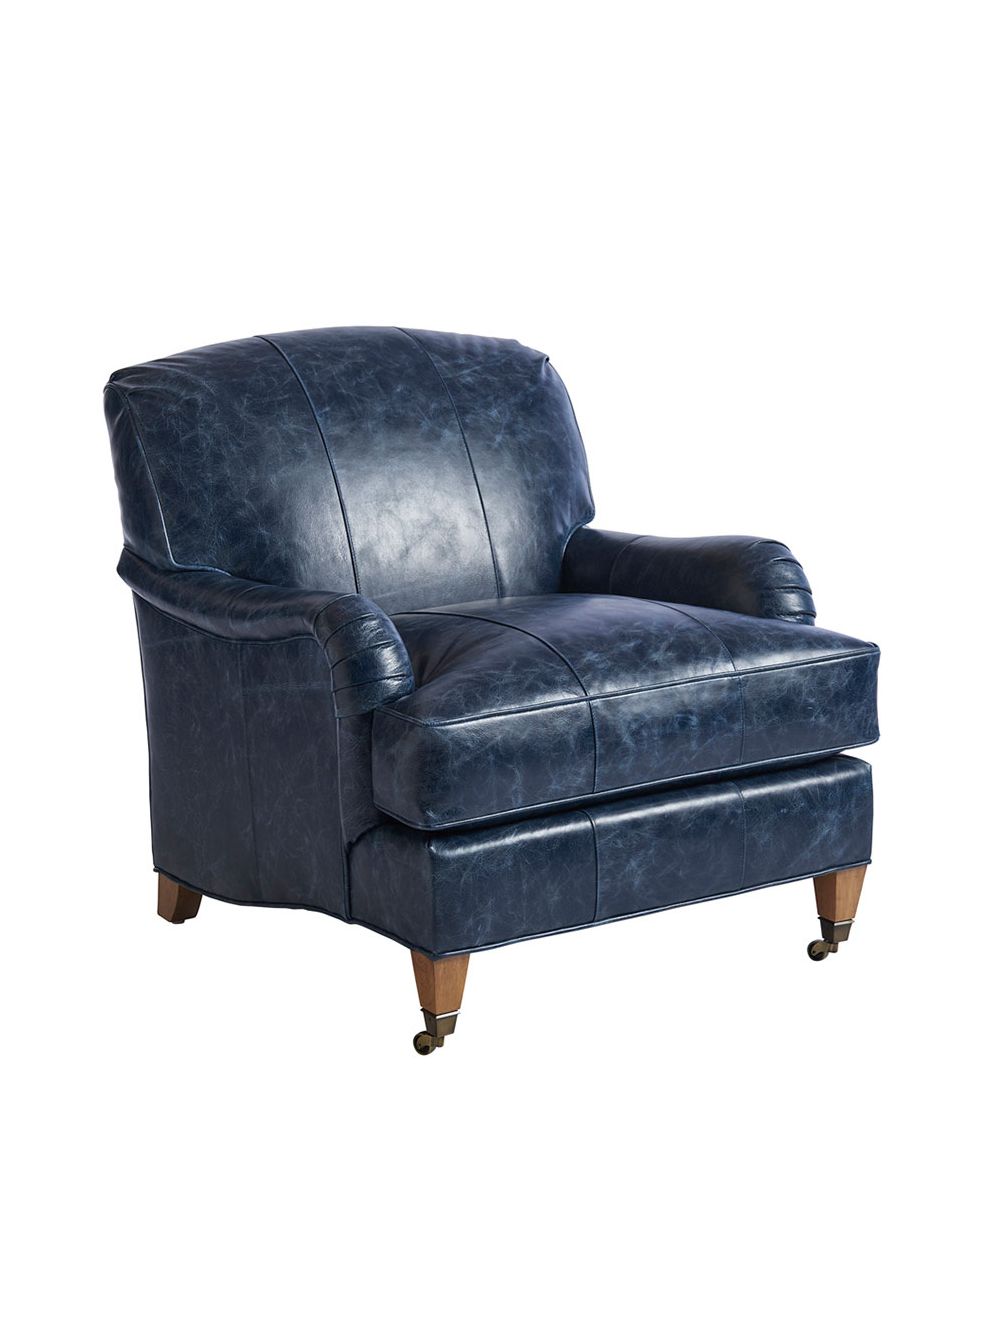 Sydney Leather Chair Navy Blue, Navy Leather Recliner